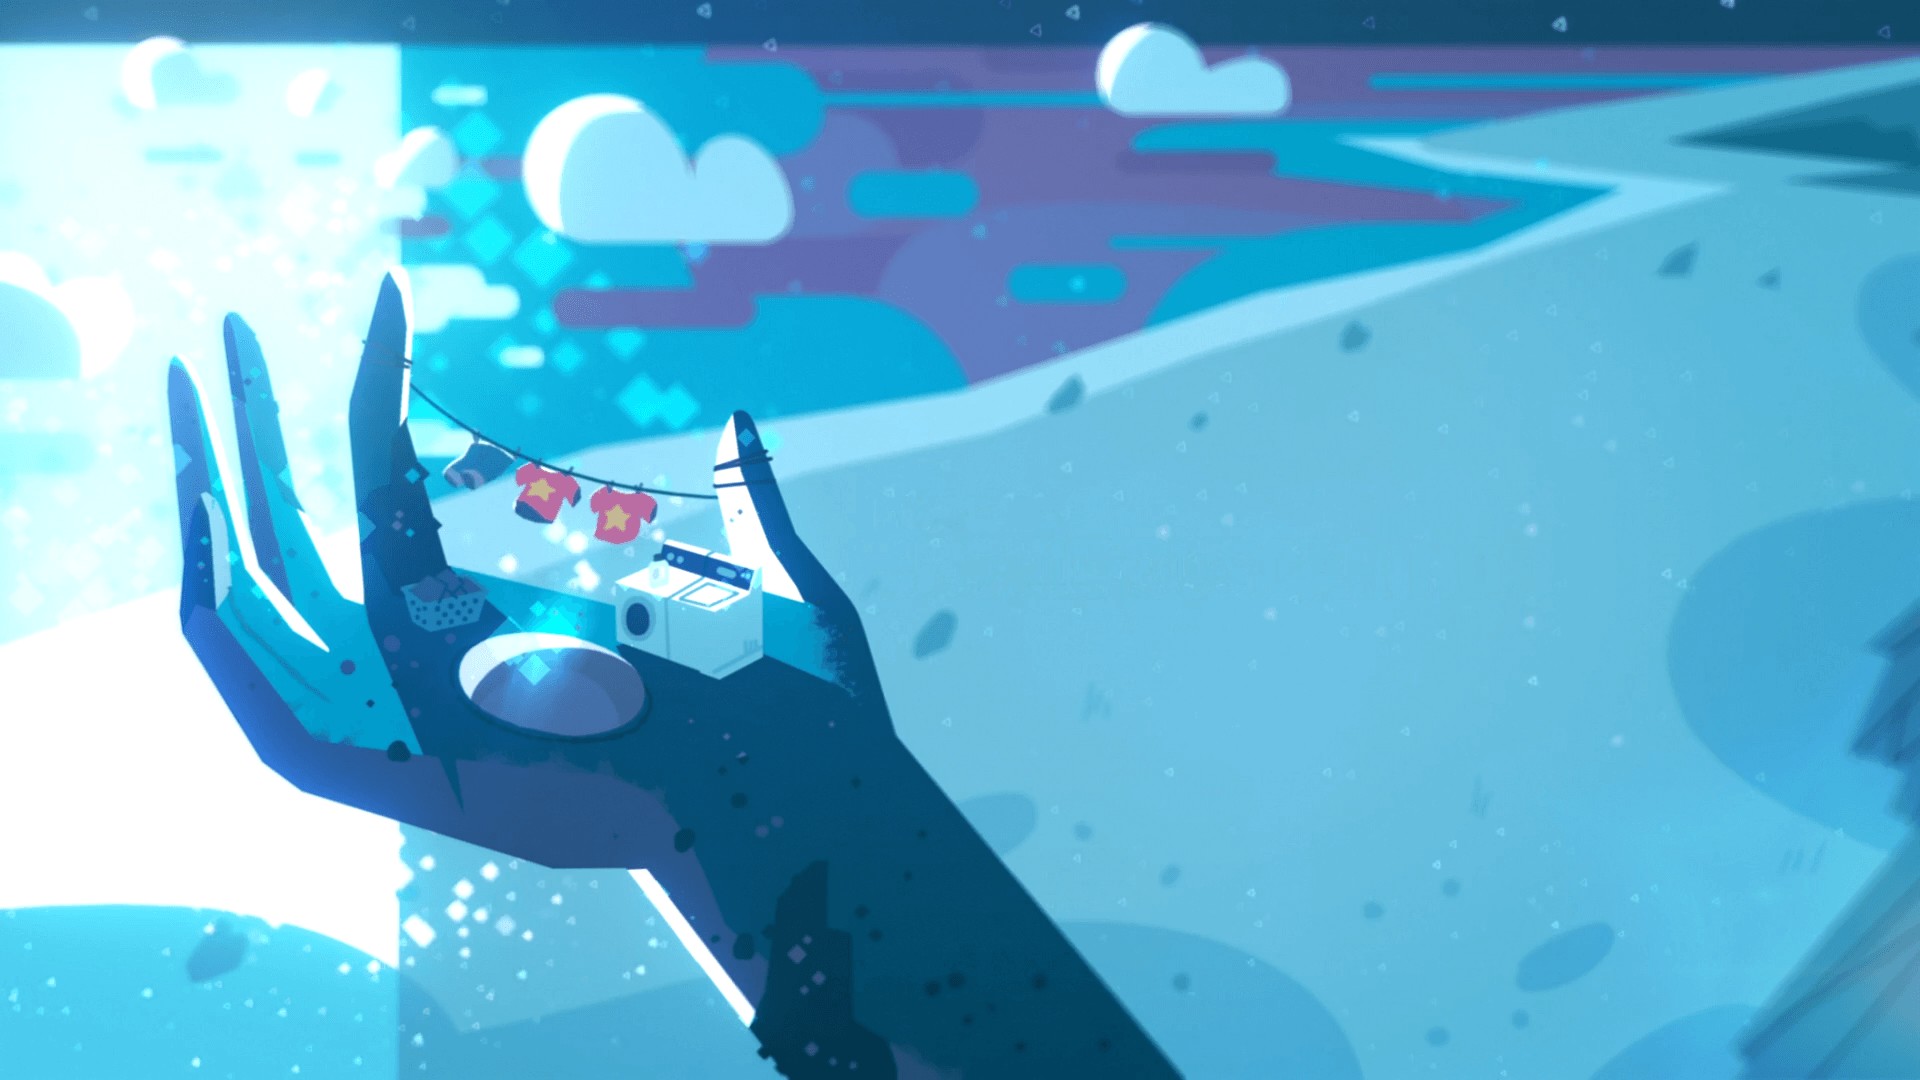 Wallpaper Steven Universe The Movie with high-resolution 1920x1080 pixel. You can use this wallpaper for your Windows and Mac OS computers as well as your Android and iPhone smartphones